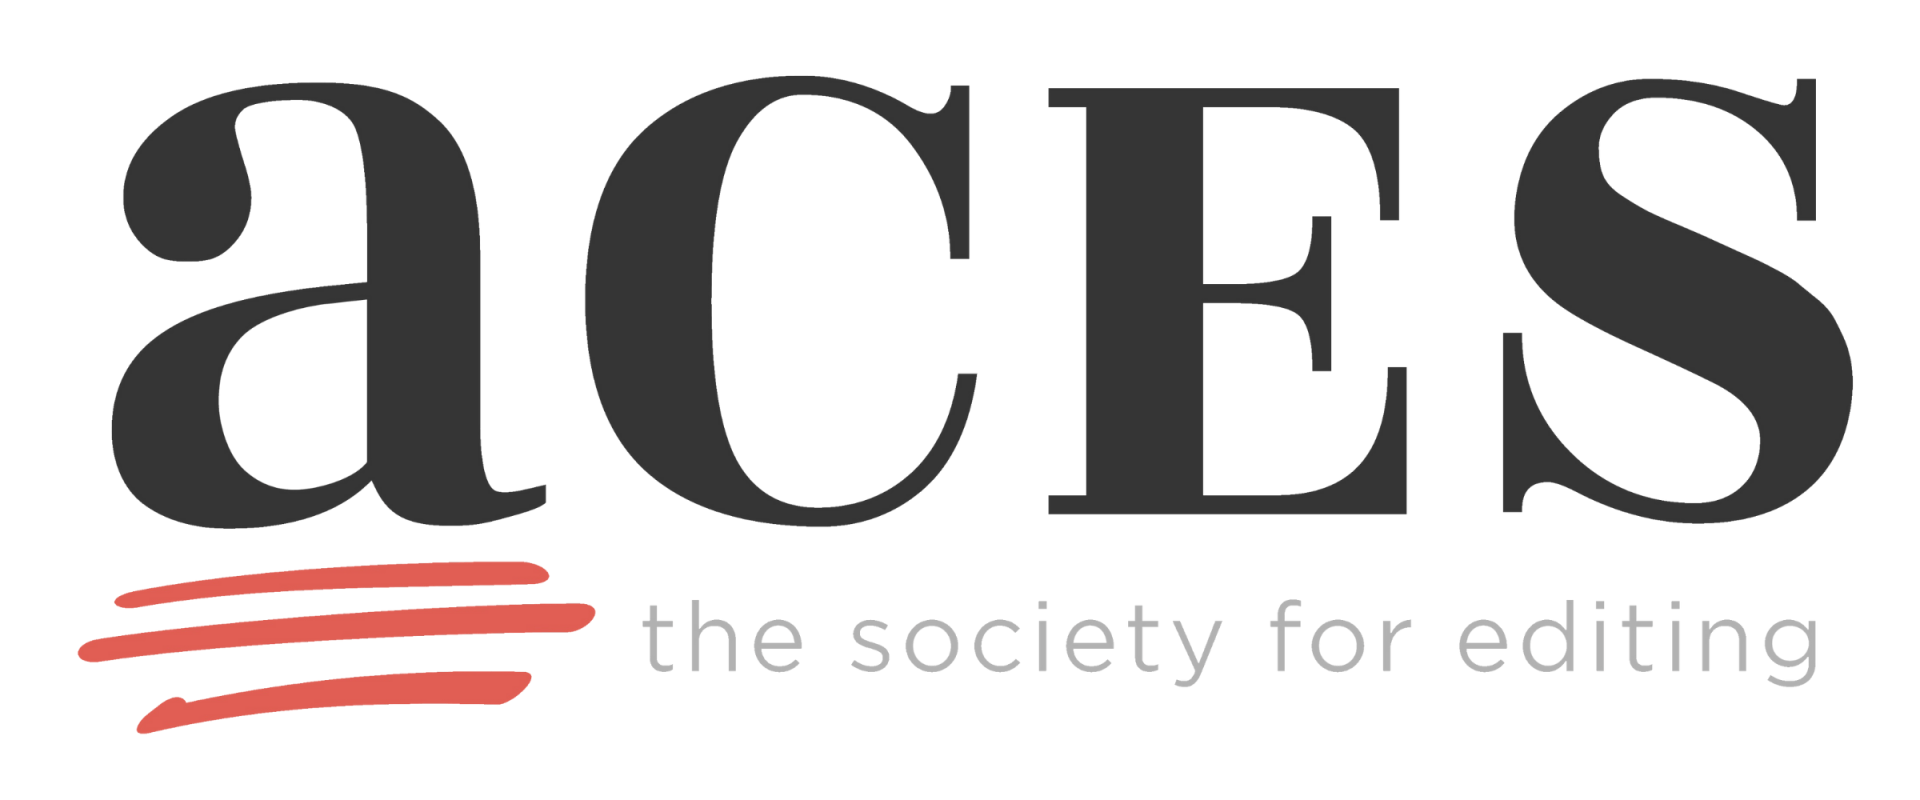 aces the society for editing